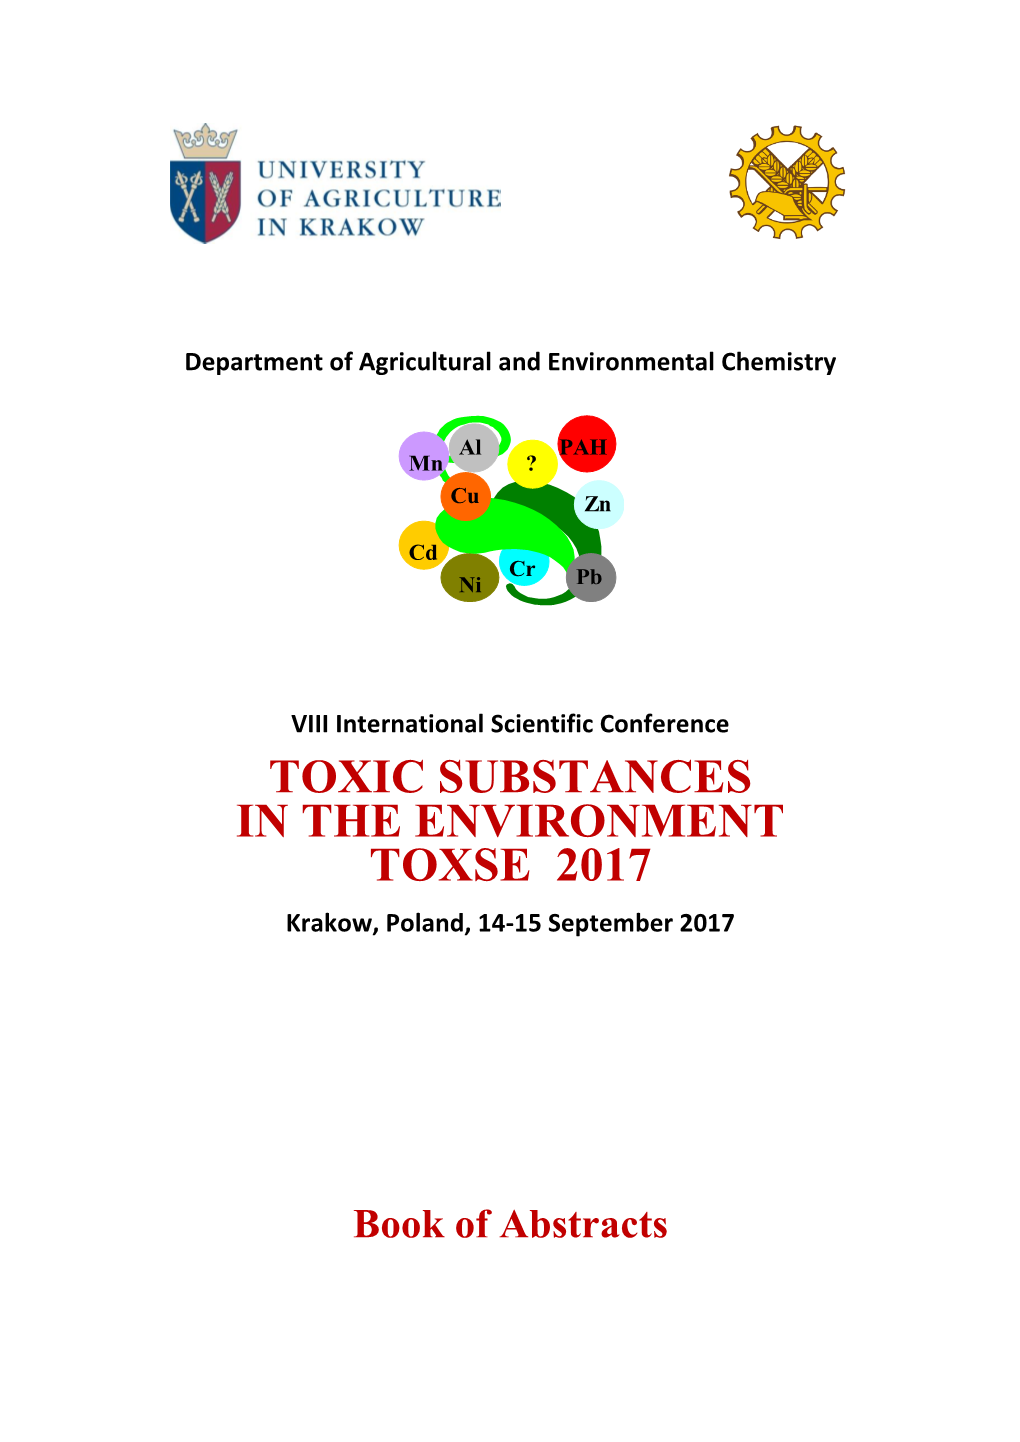 Toxic Substances in the Environment Toxse 2017